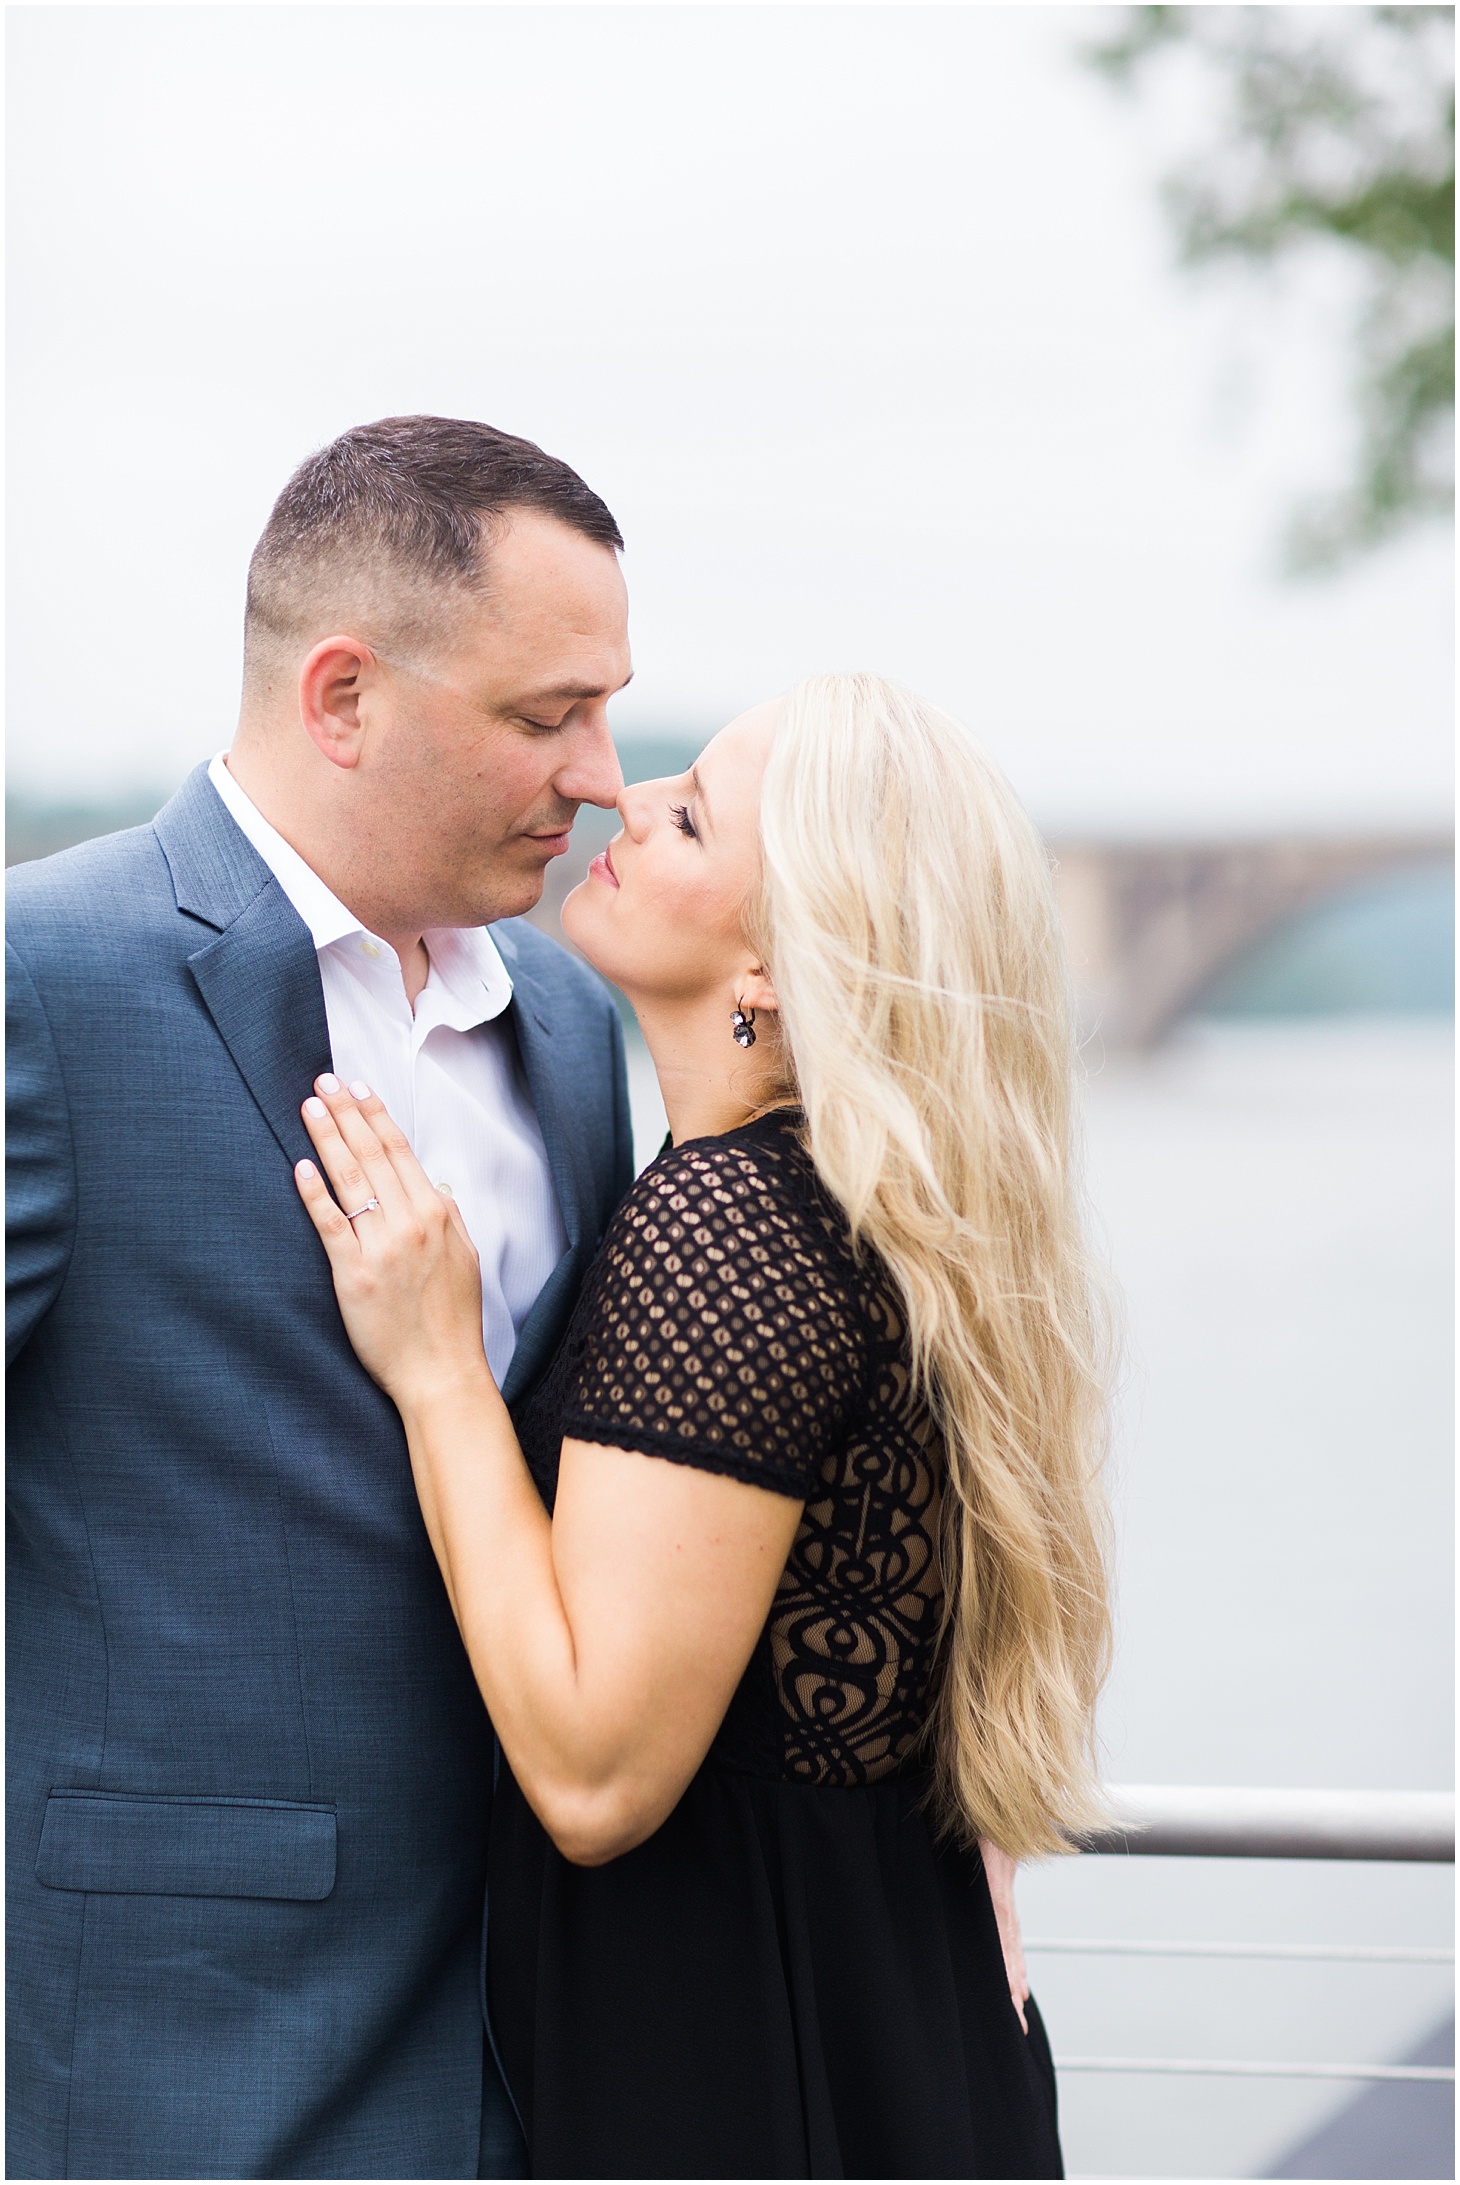 romantic-engagement-shoot-around-the-beautiful-d-c-monuments-by-sarah-bradshaw-photography_0023